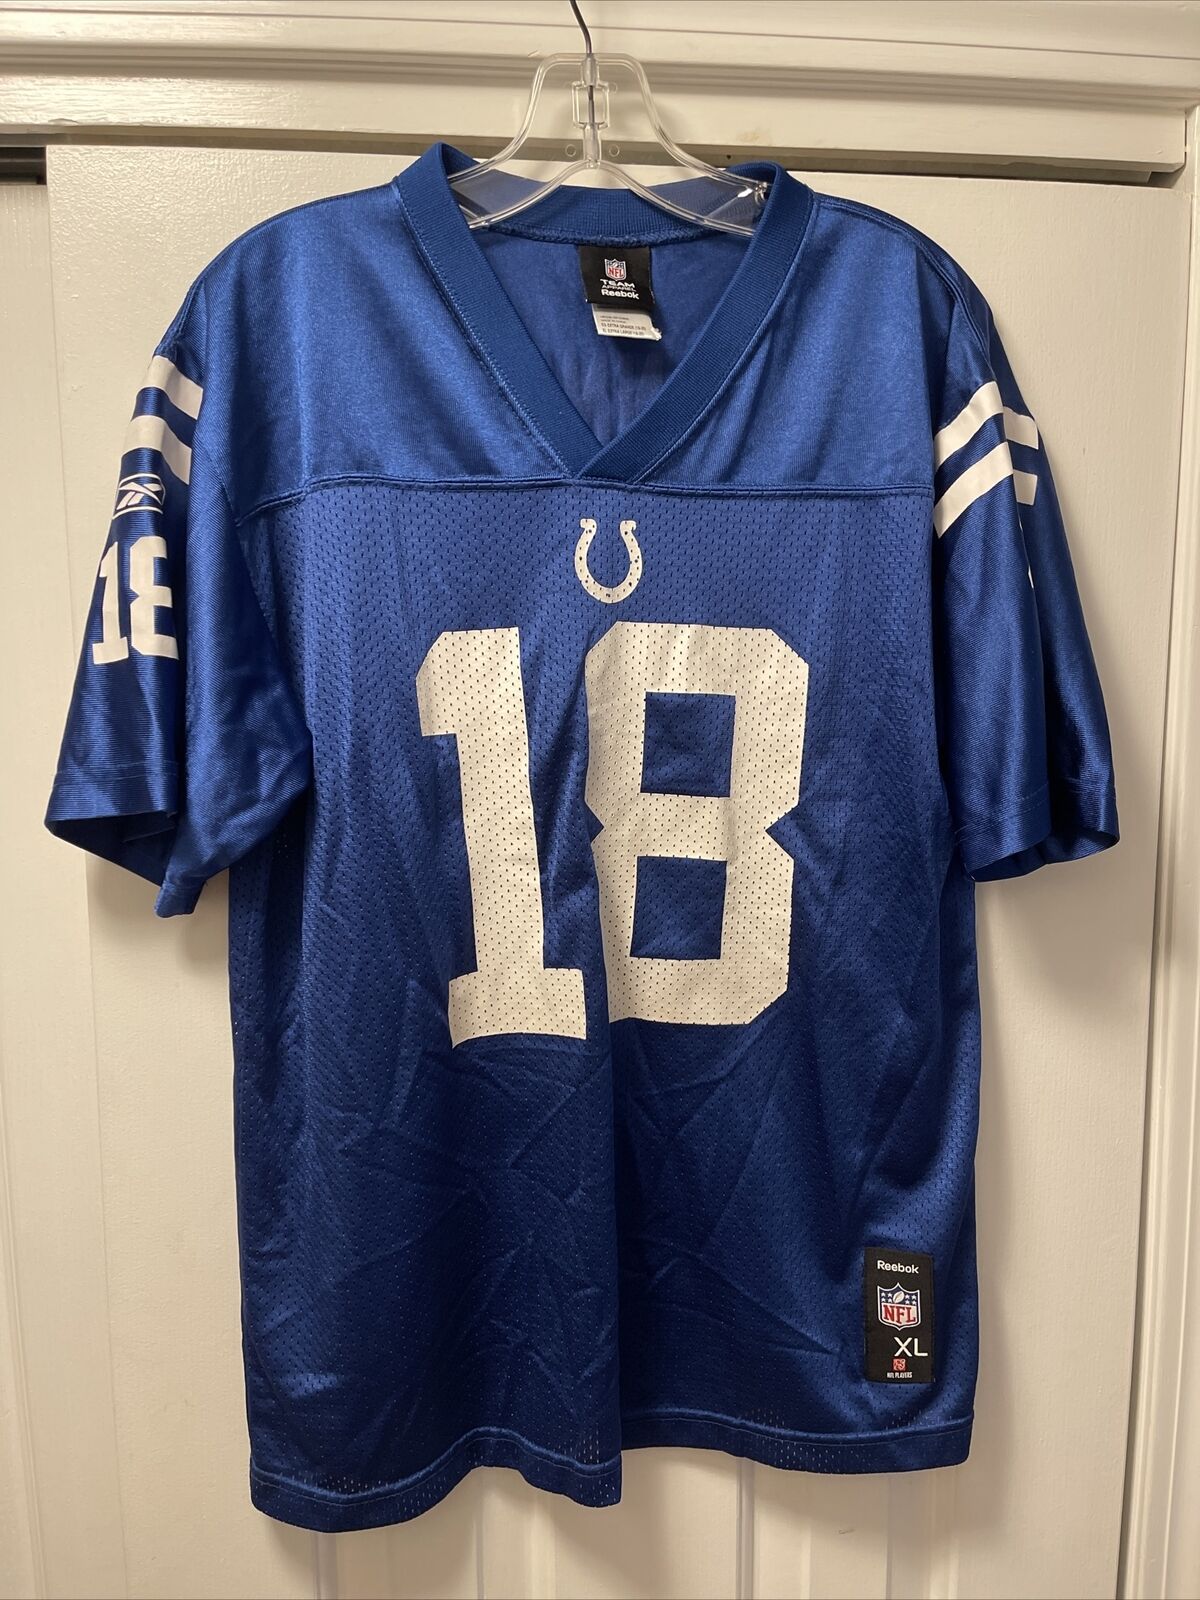 youth manning jersey